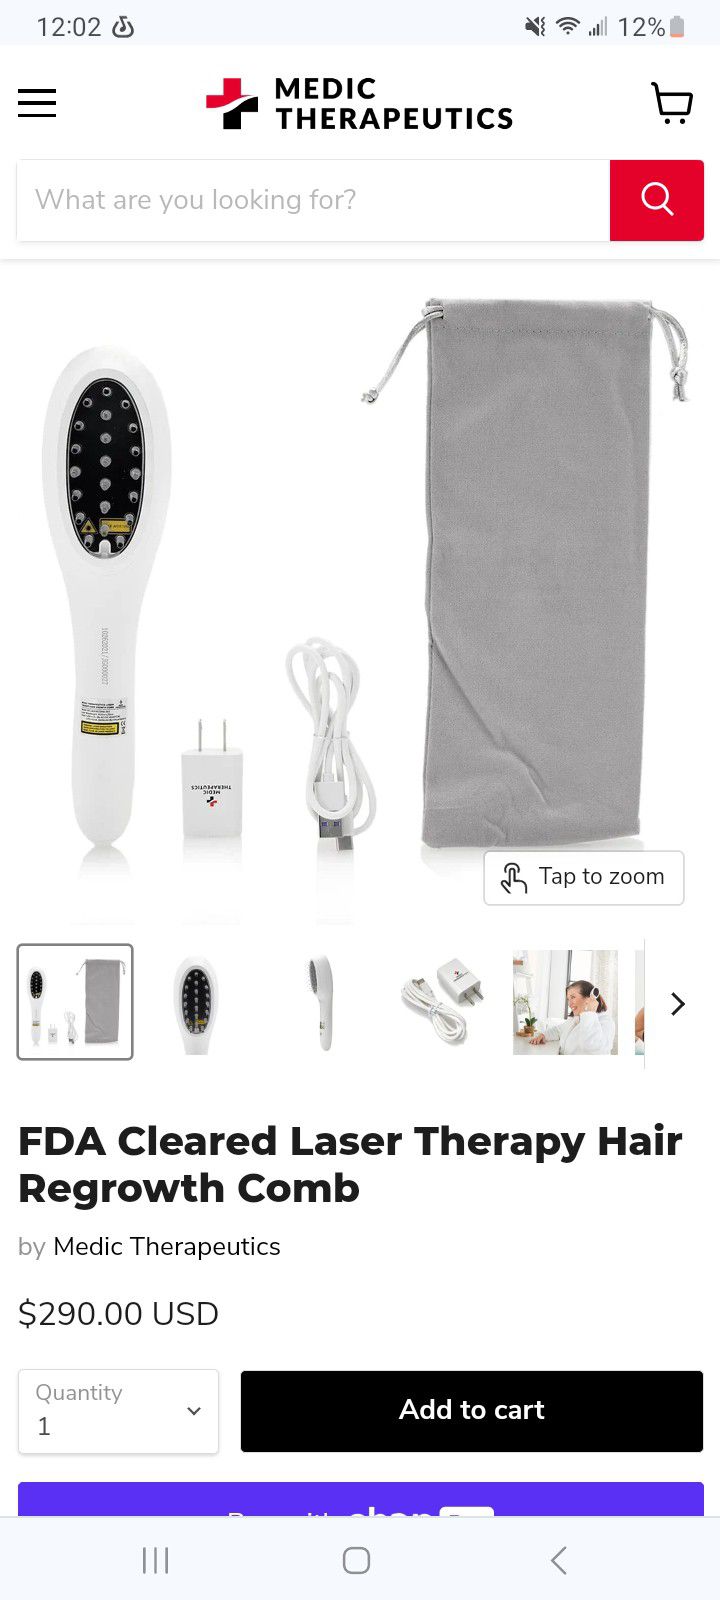 FDA CLEARED LASER THERAPY REGROWTH COMB